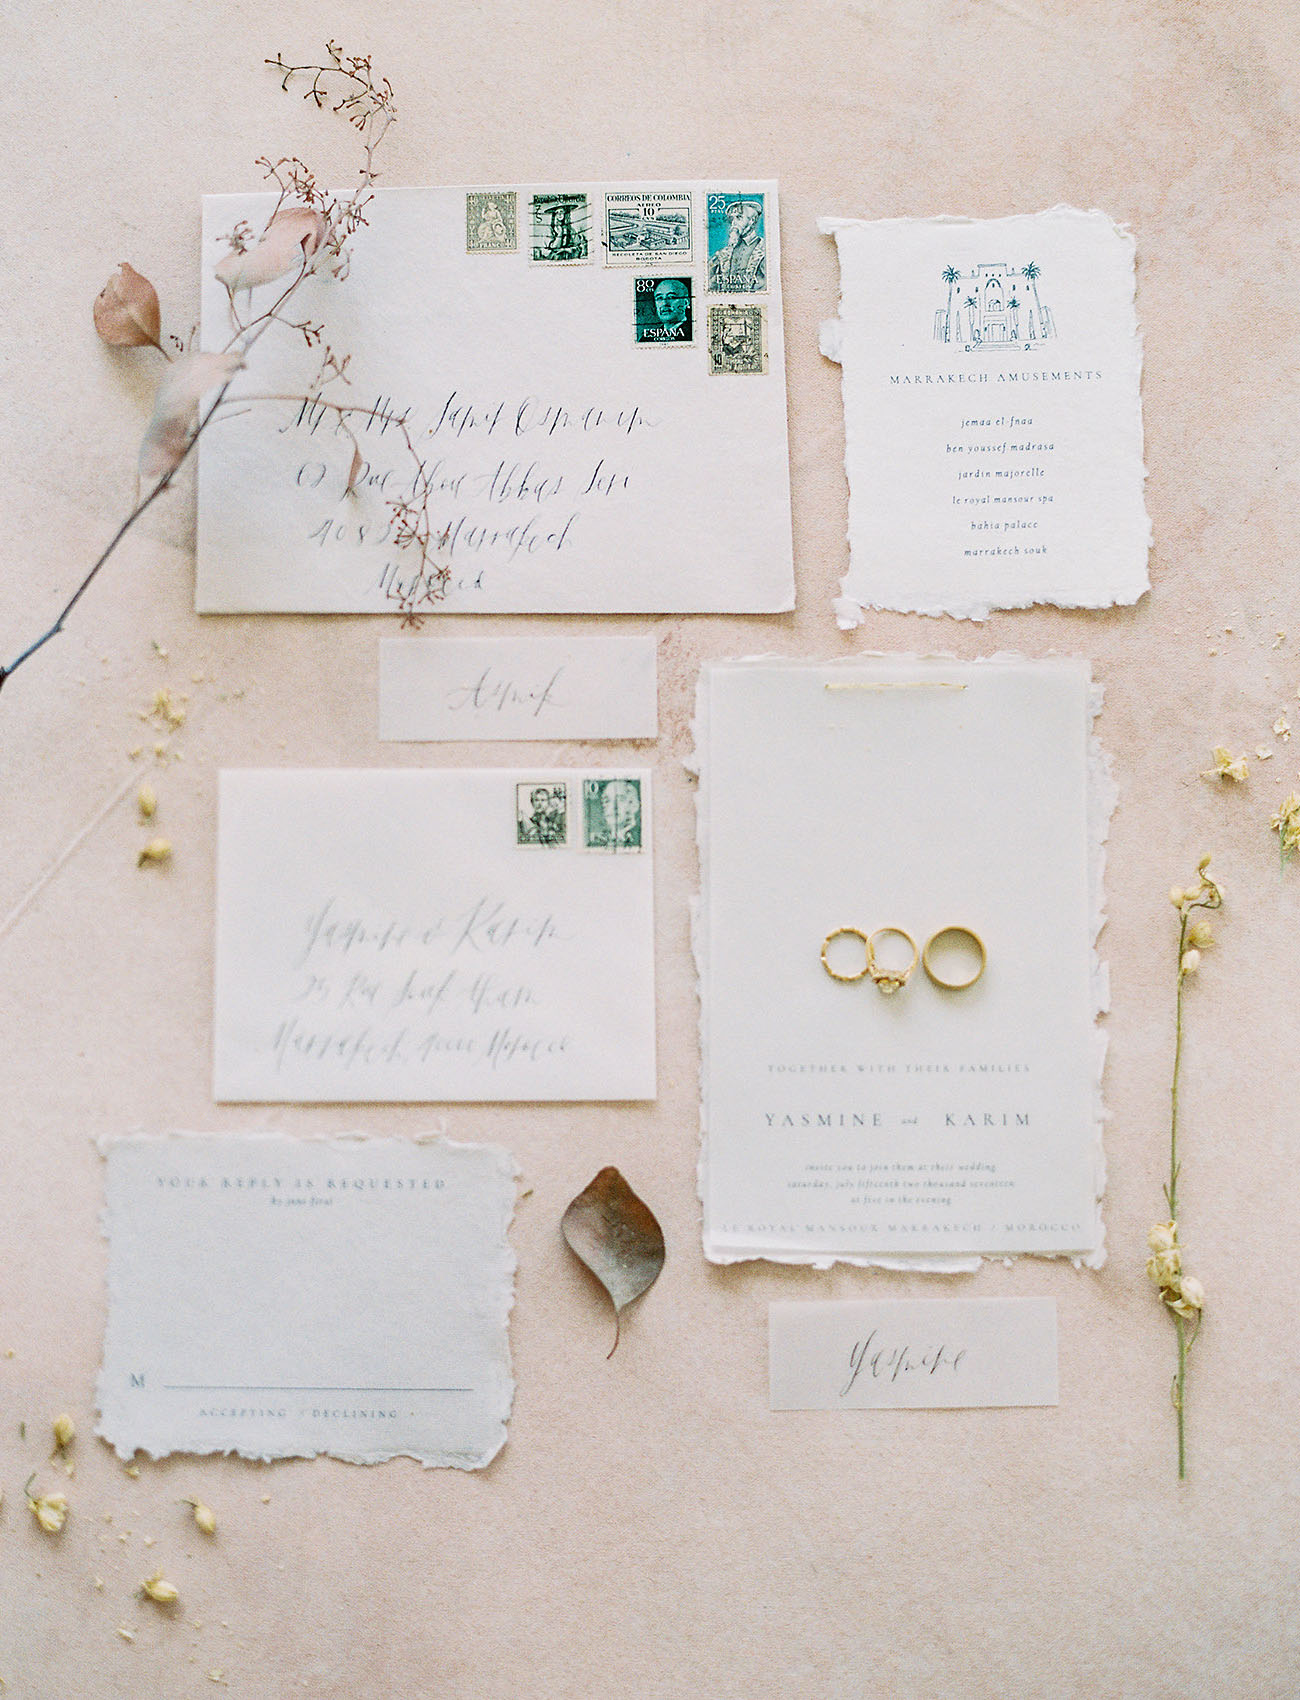 The wedding stationery with a raw edge looks neutral and very soft